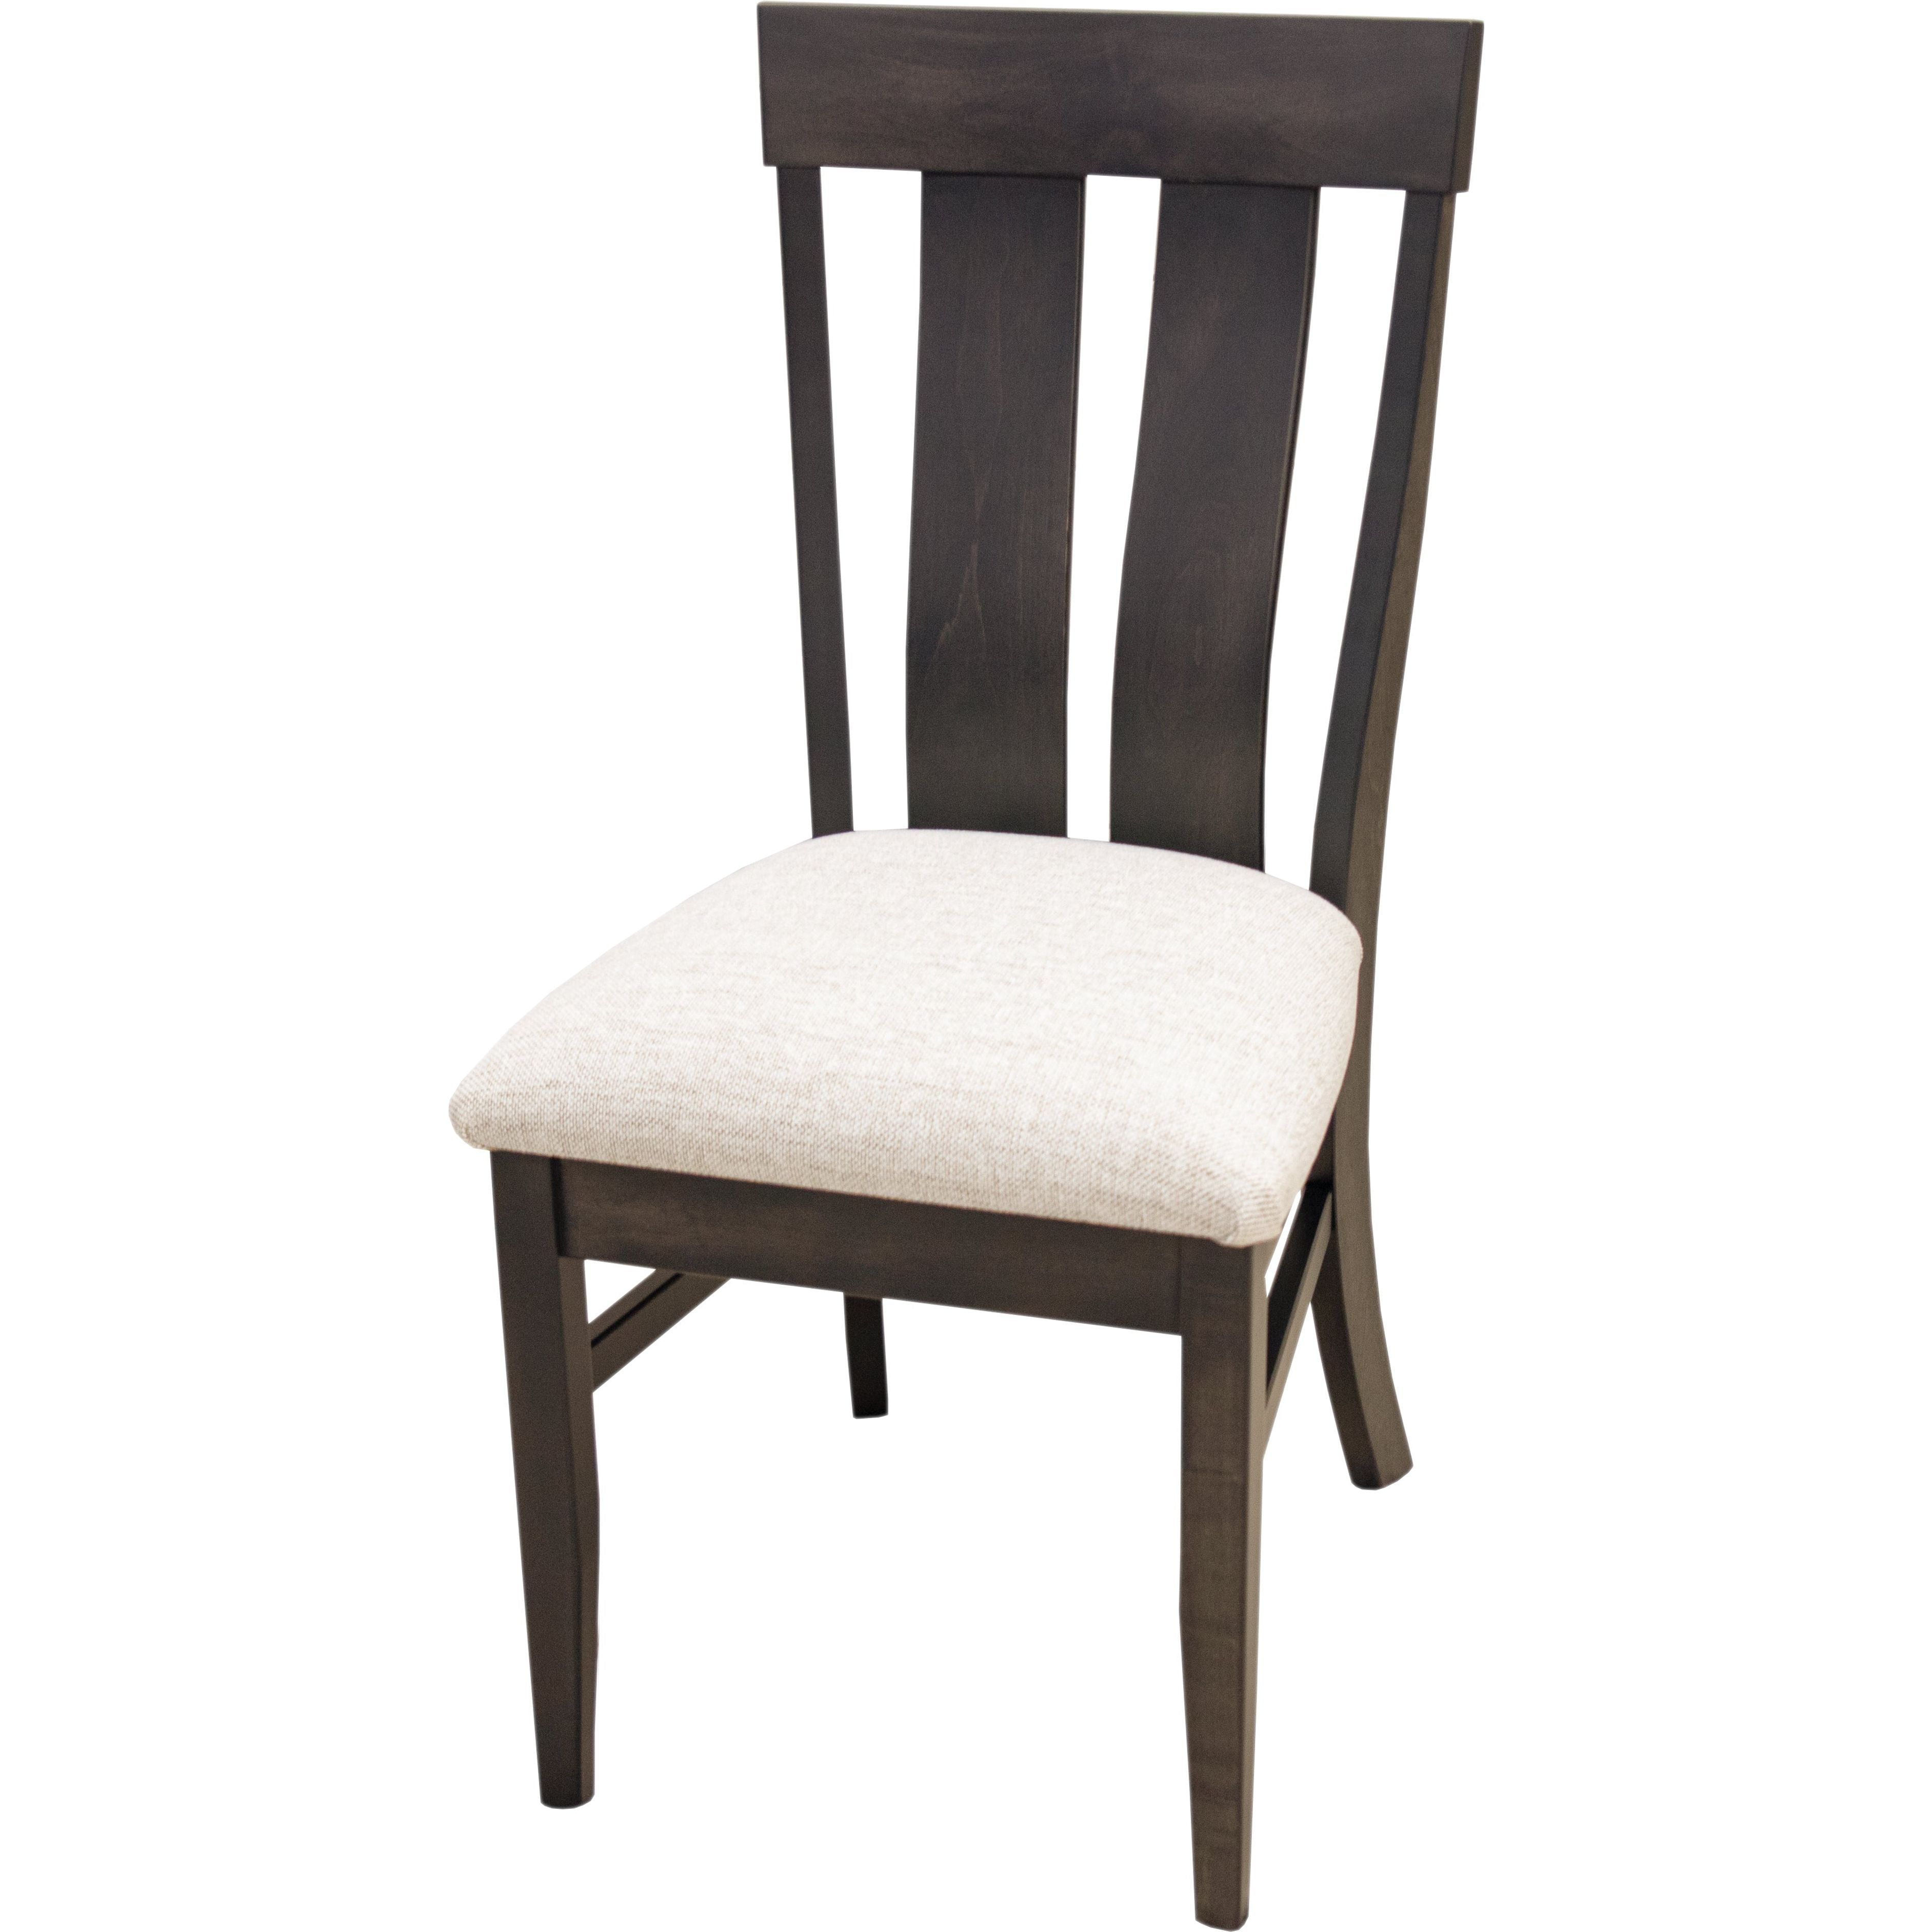 Kinglet Side Chair with Faux Leather Seat